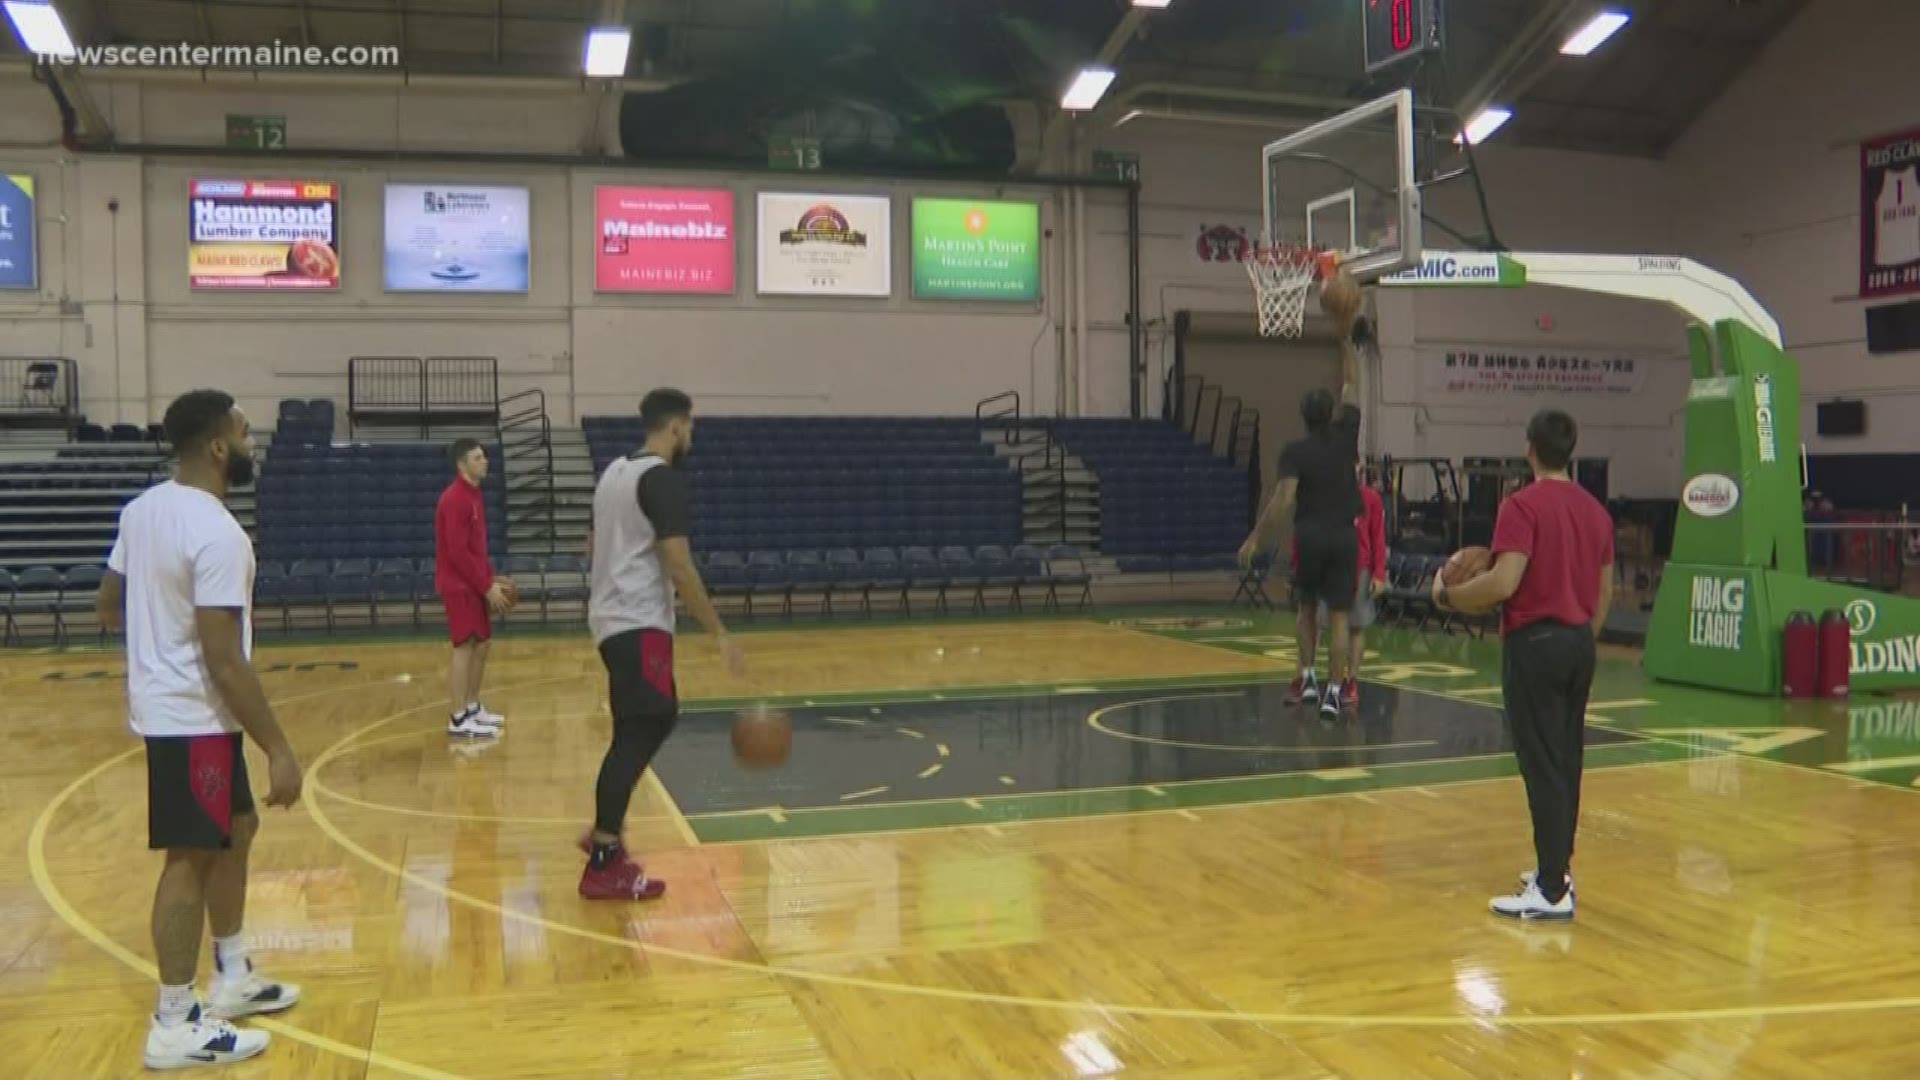 For the Red Claws home opener, Tremont Waters said during practice on Nov. 14, 2019 that he plans to stick to the strategy that won the season's first road game.